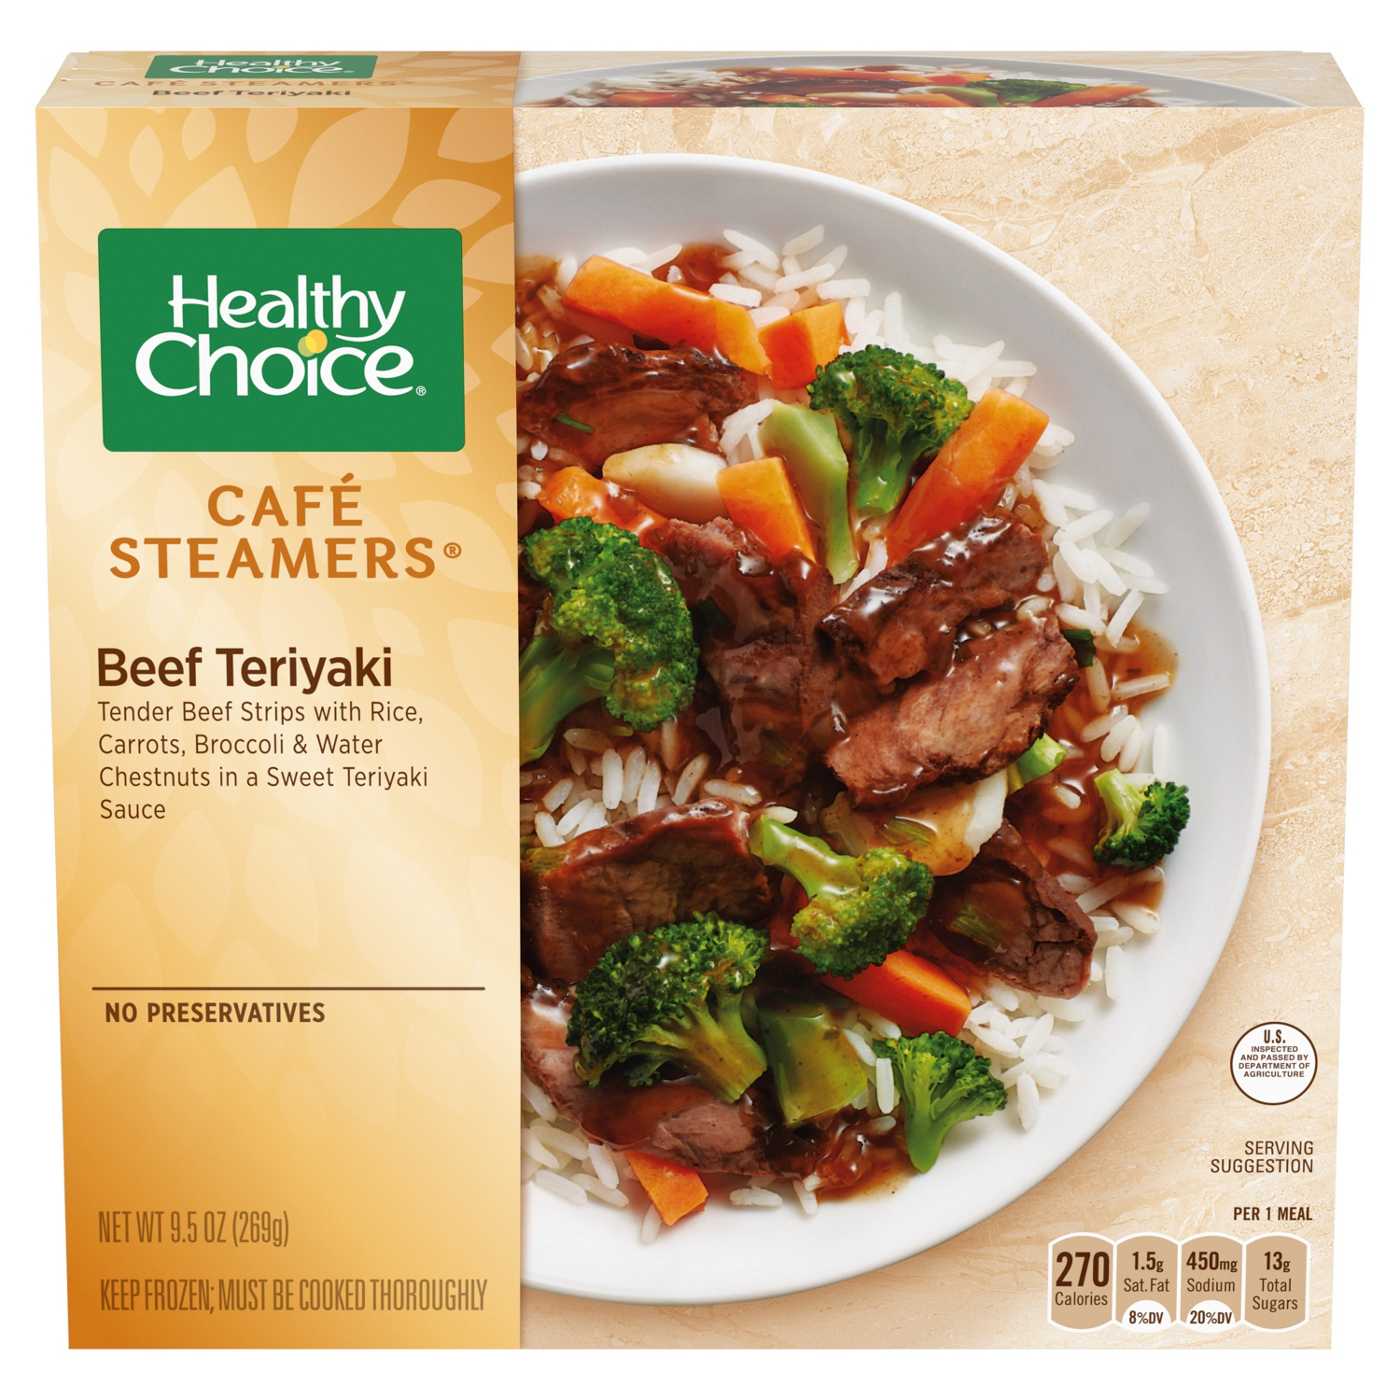 Healthy Choice Café Steamers Beef Teriyaki Frozen Meal; image 1 of 7